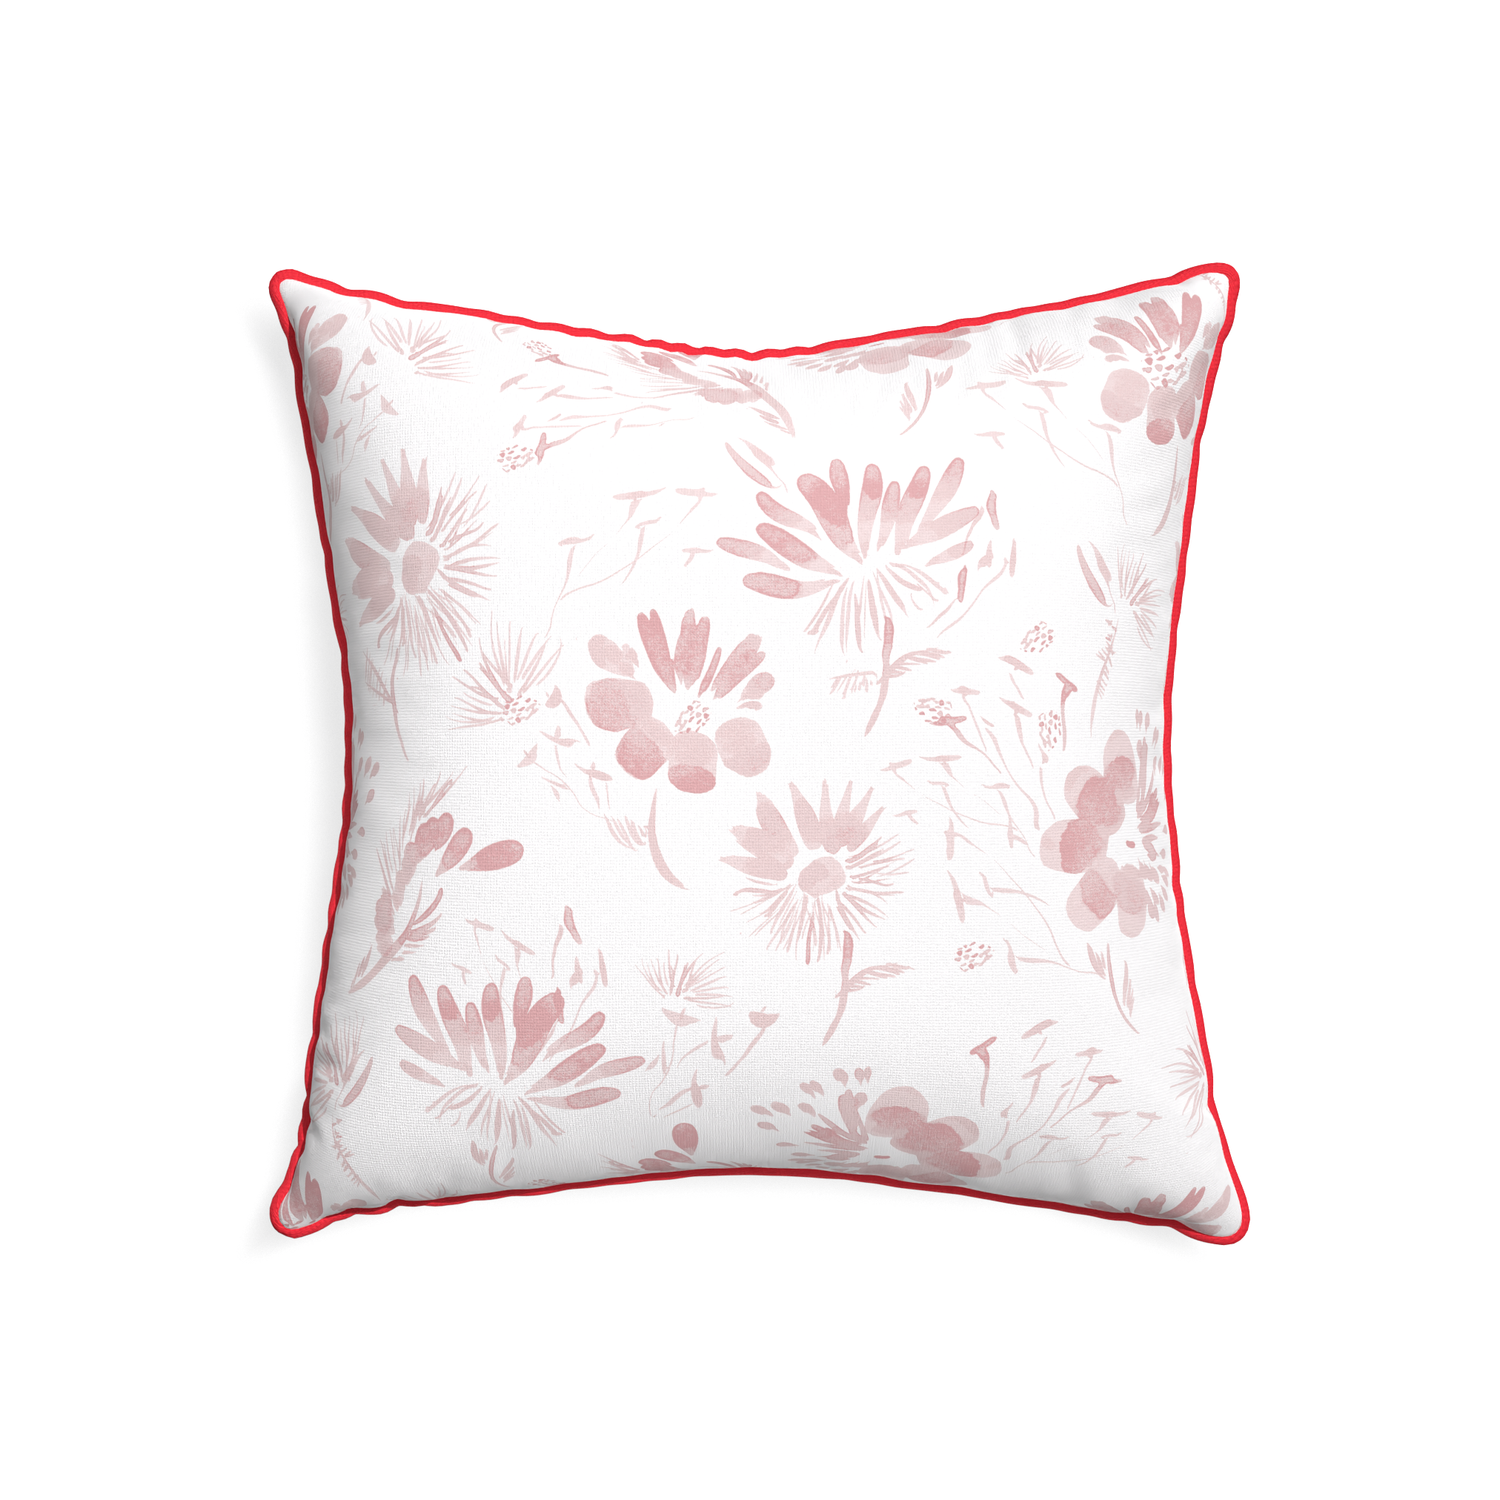 22-square blake custom pink floralpillow with cherry piping on white background